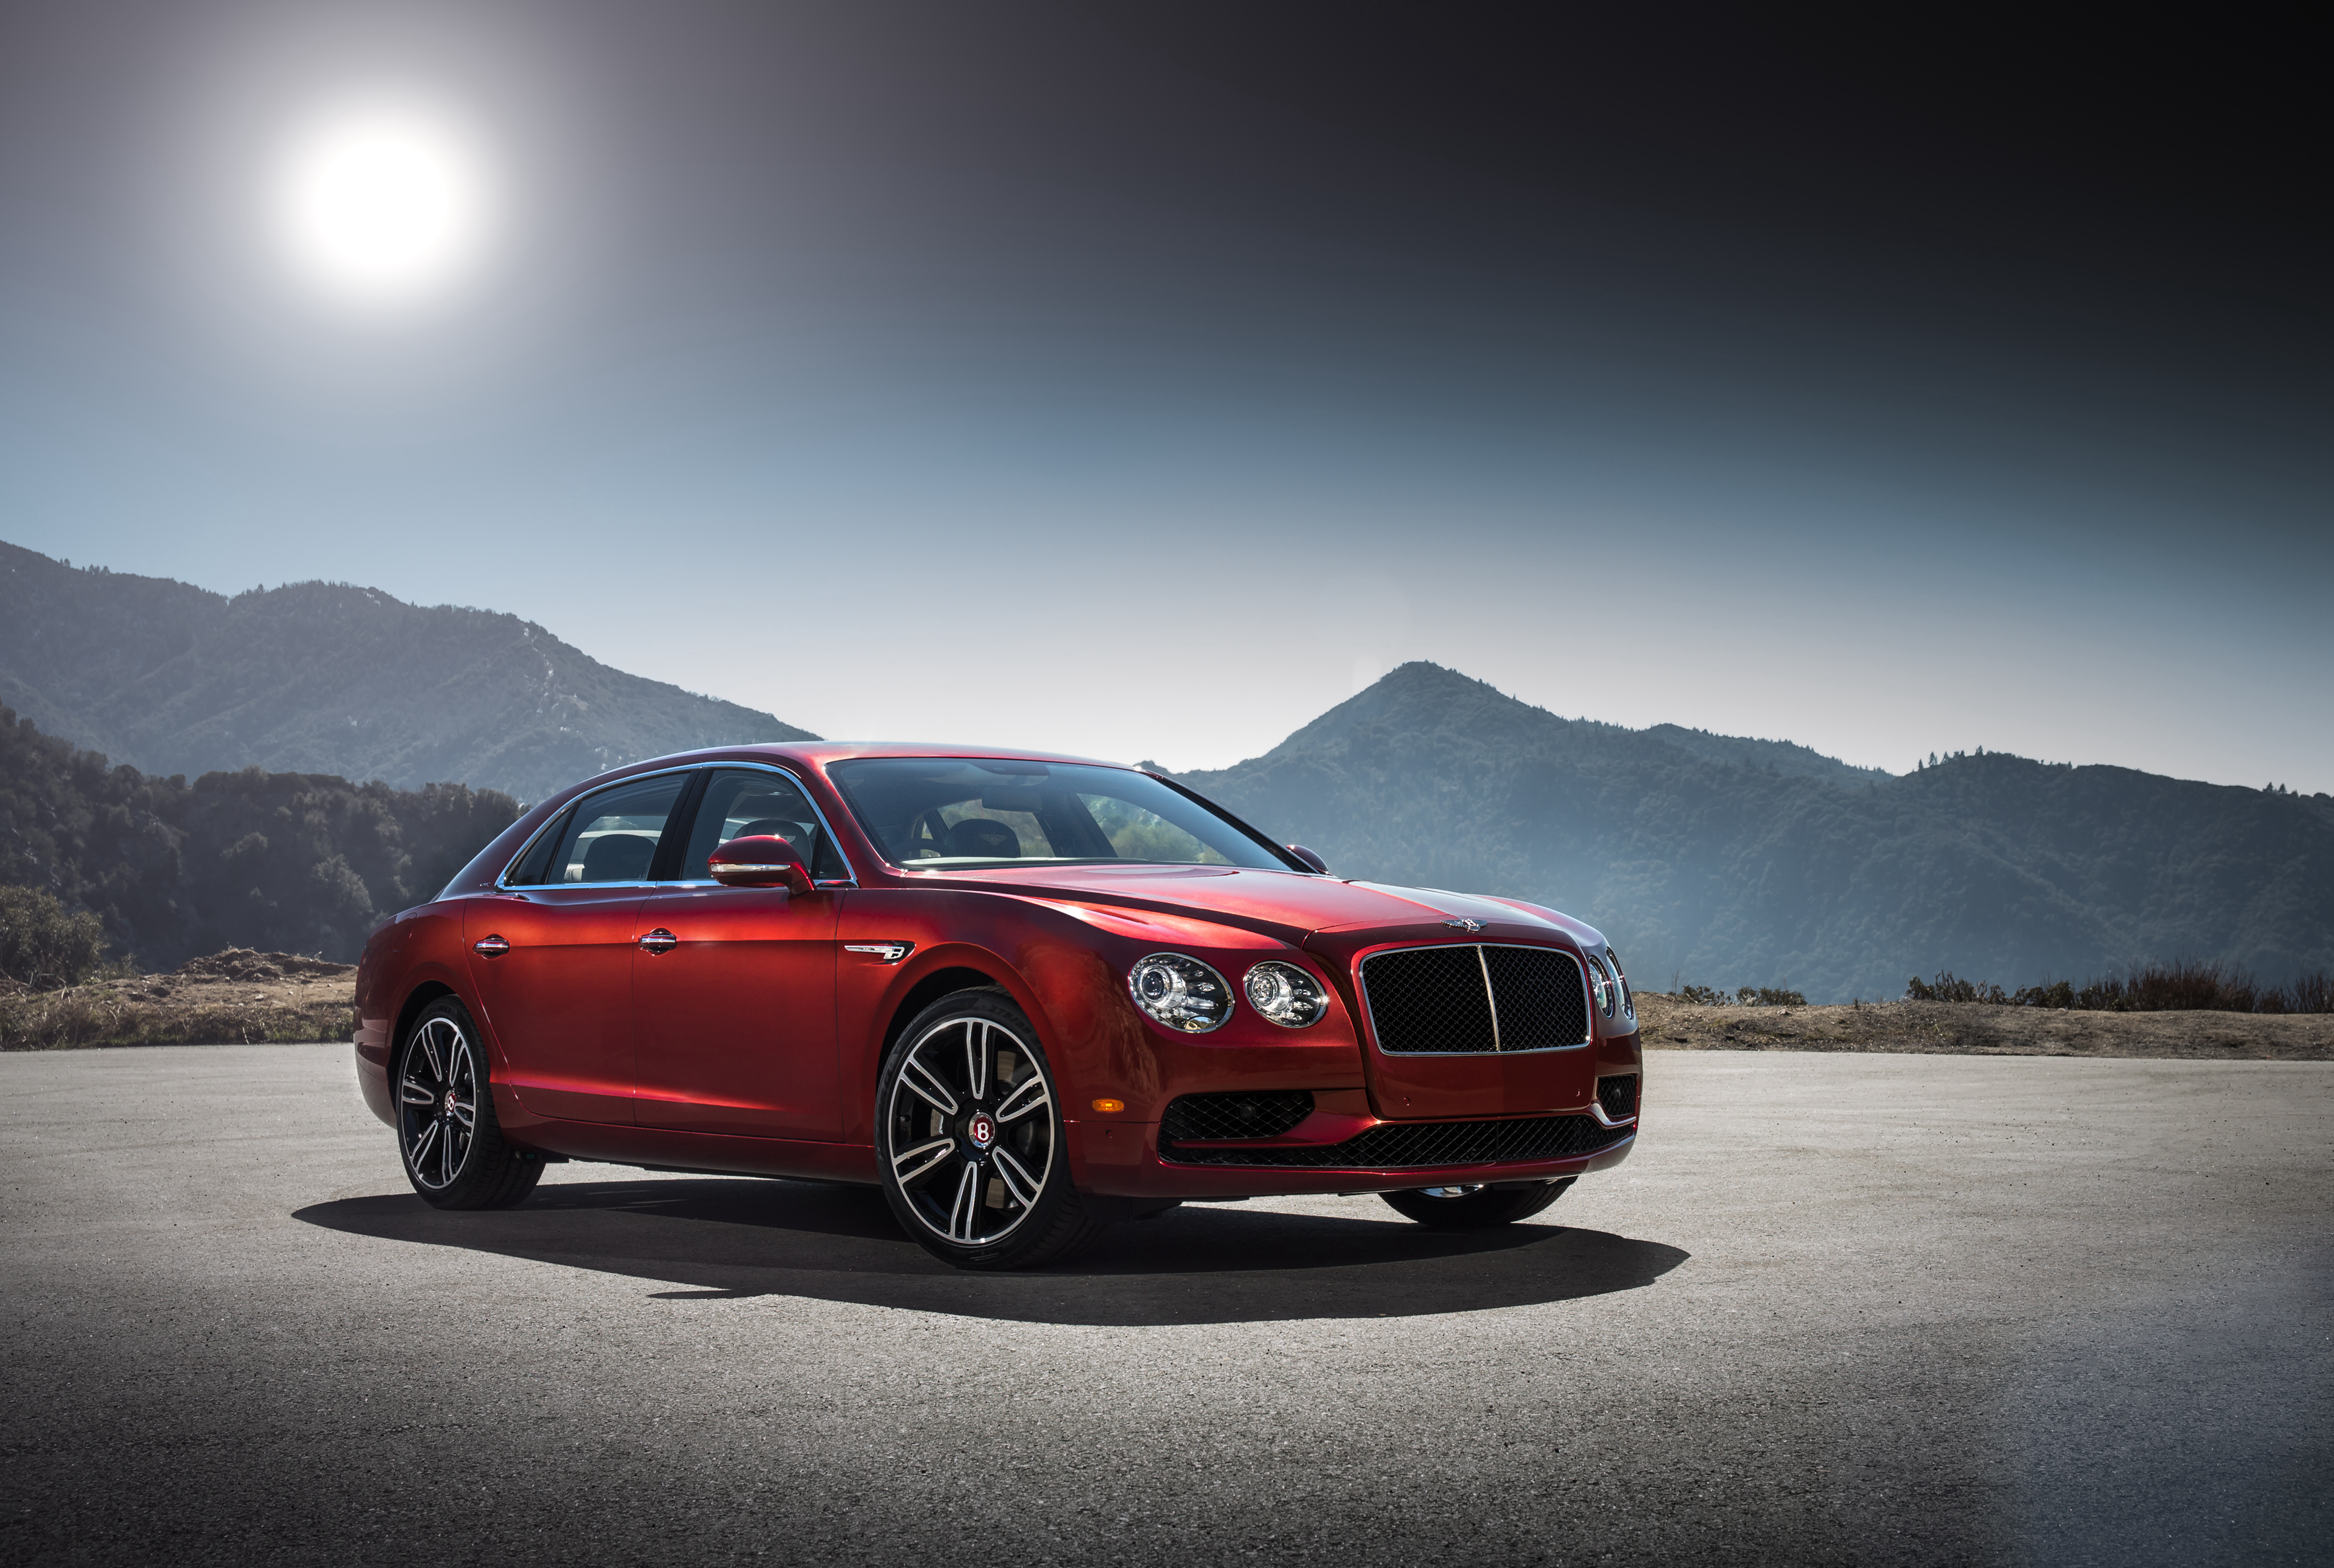 Bentley S3 Continental Flying Spur Wallpapers